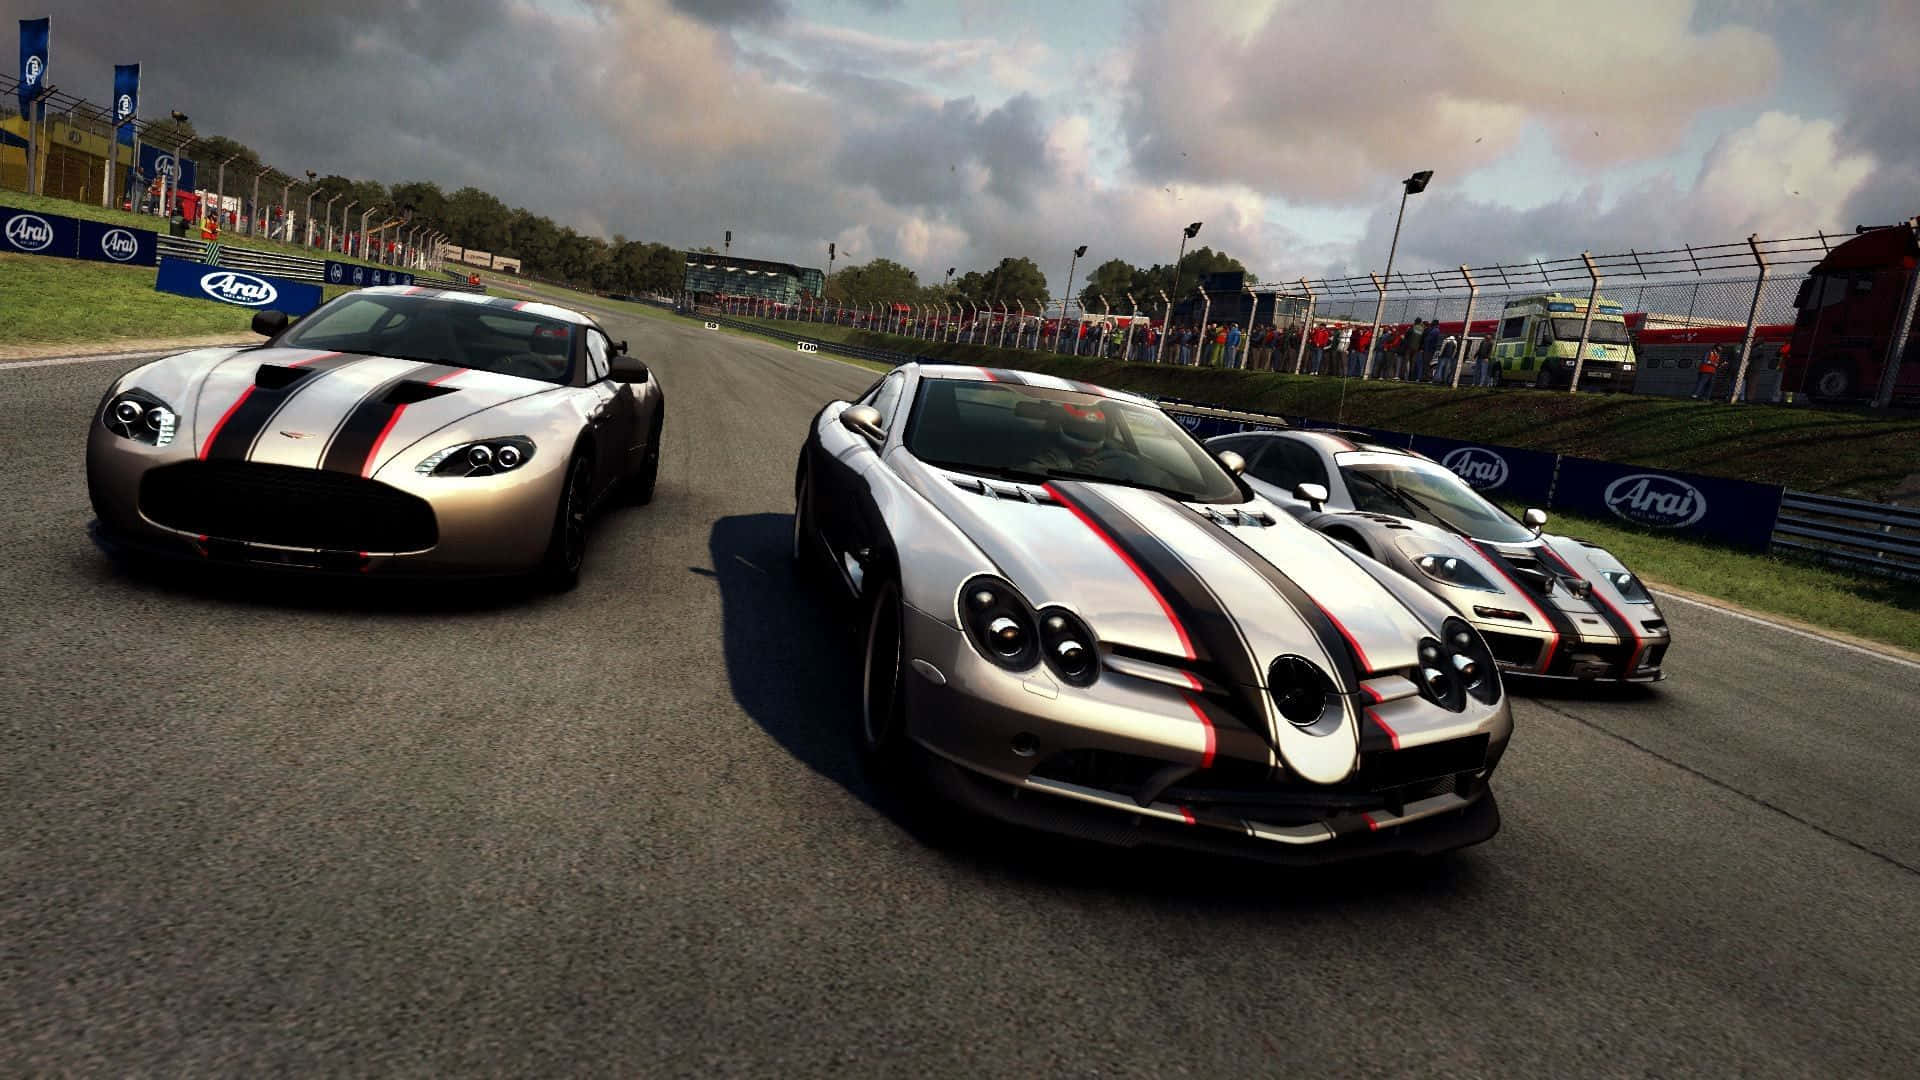 Race in full HD with Grid Autosport